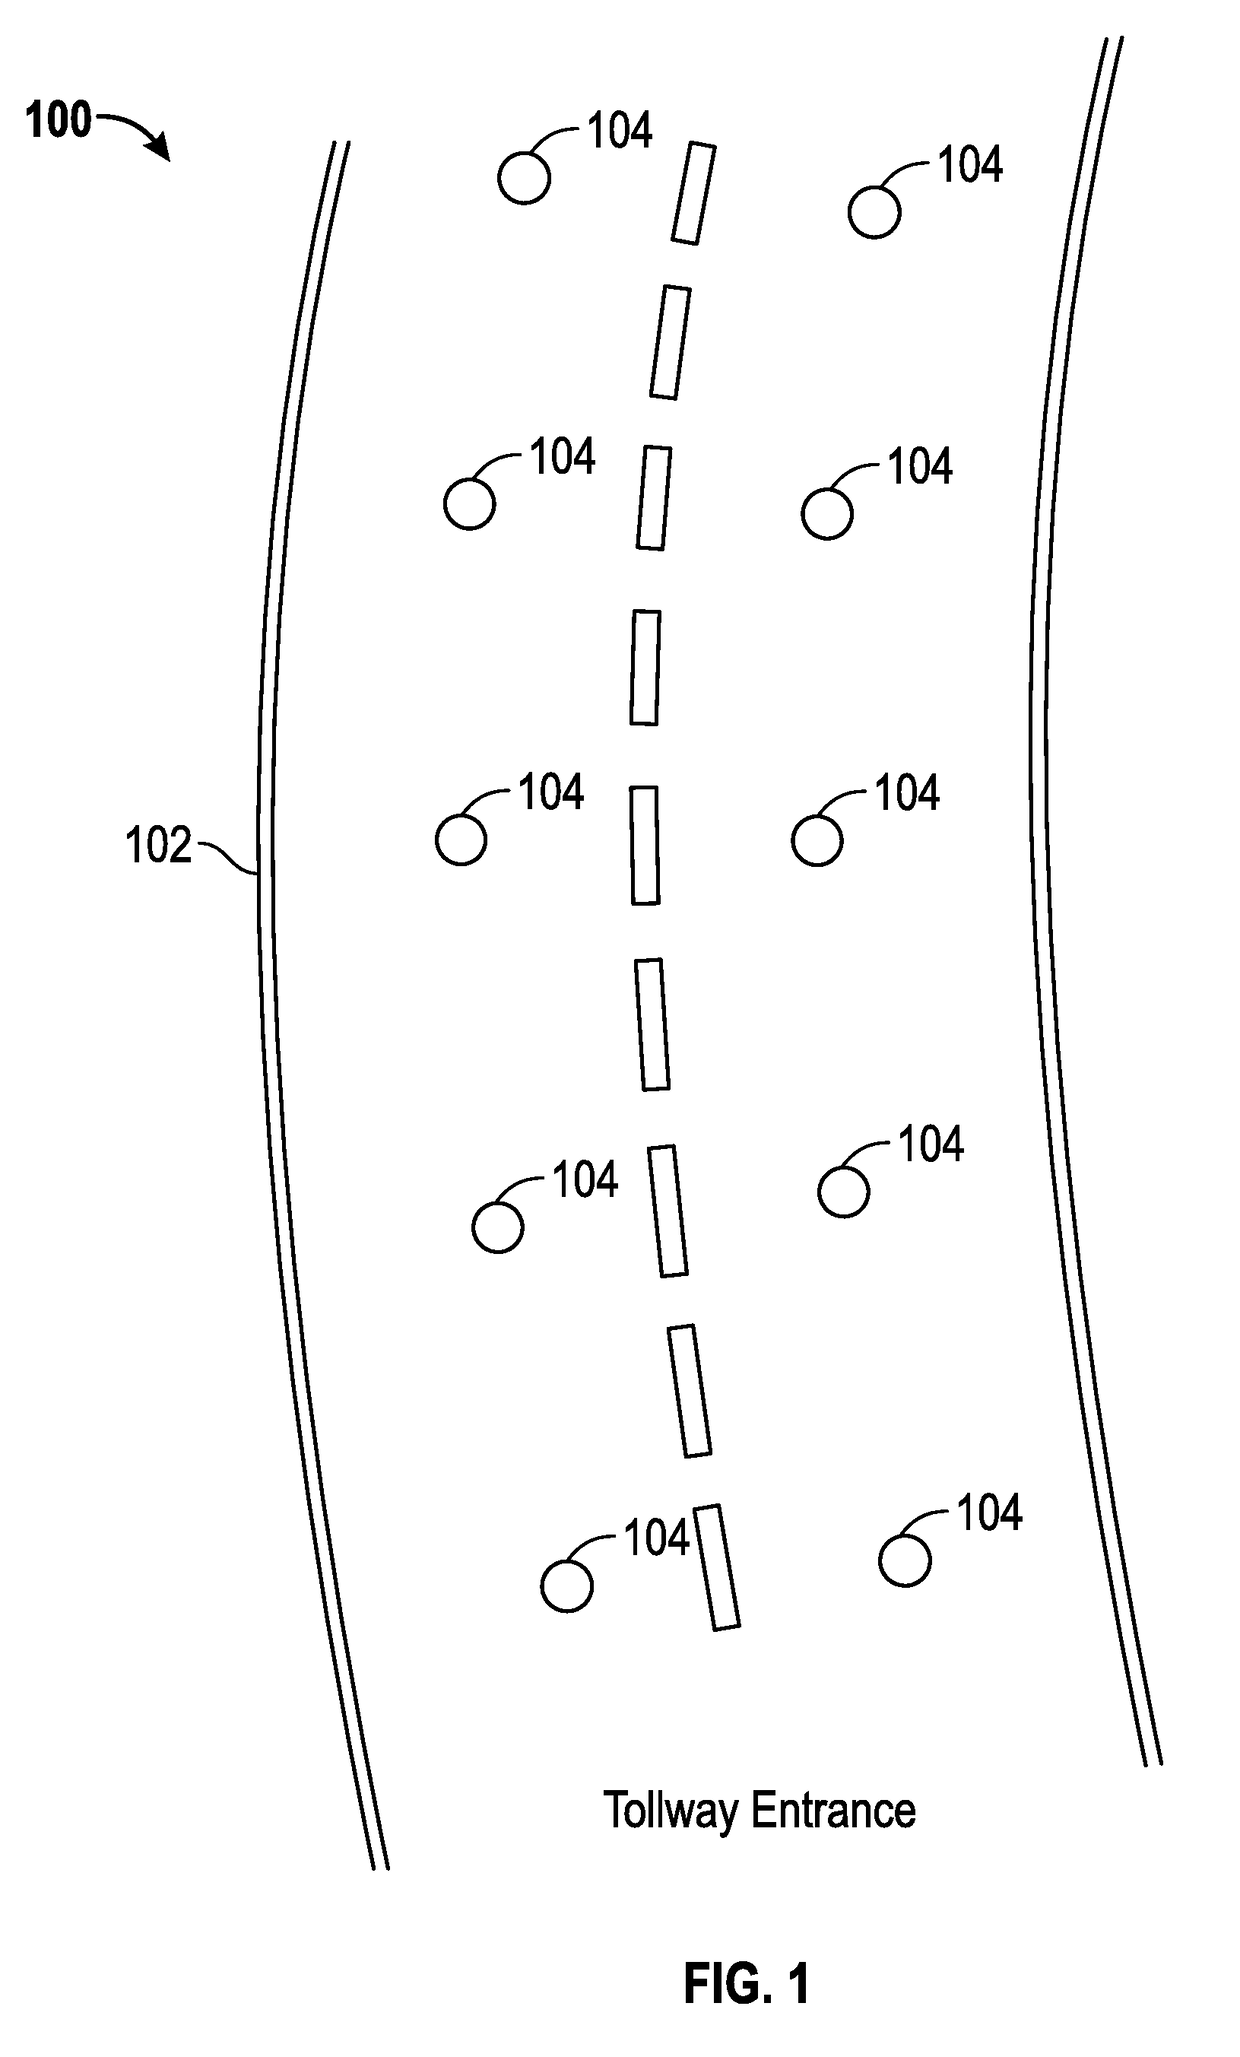 Systems and Methods for Monitoring Roadways Using Magnetic Signatures